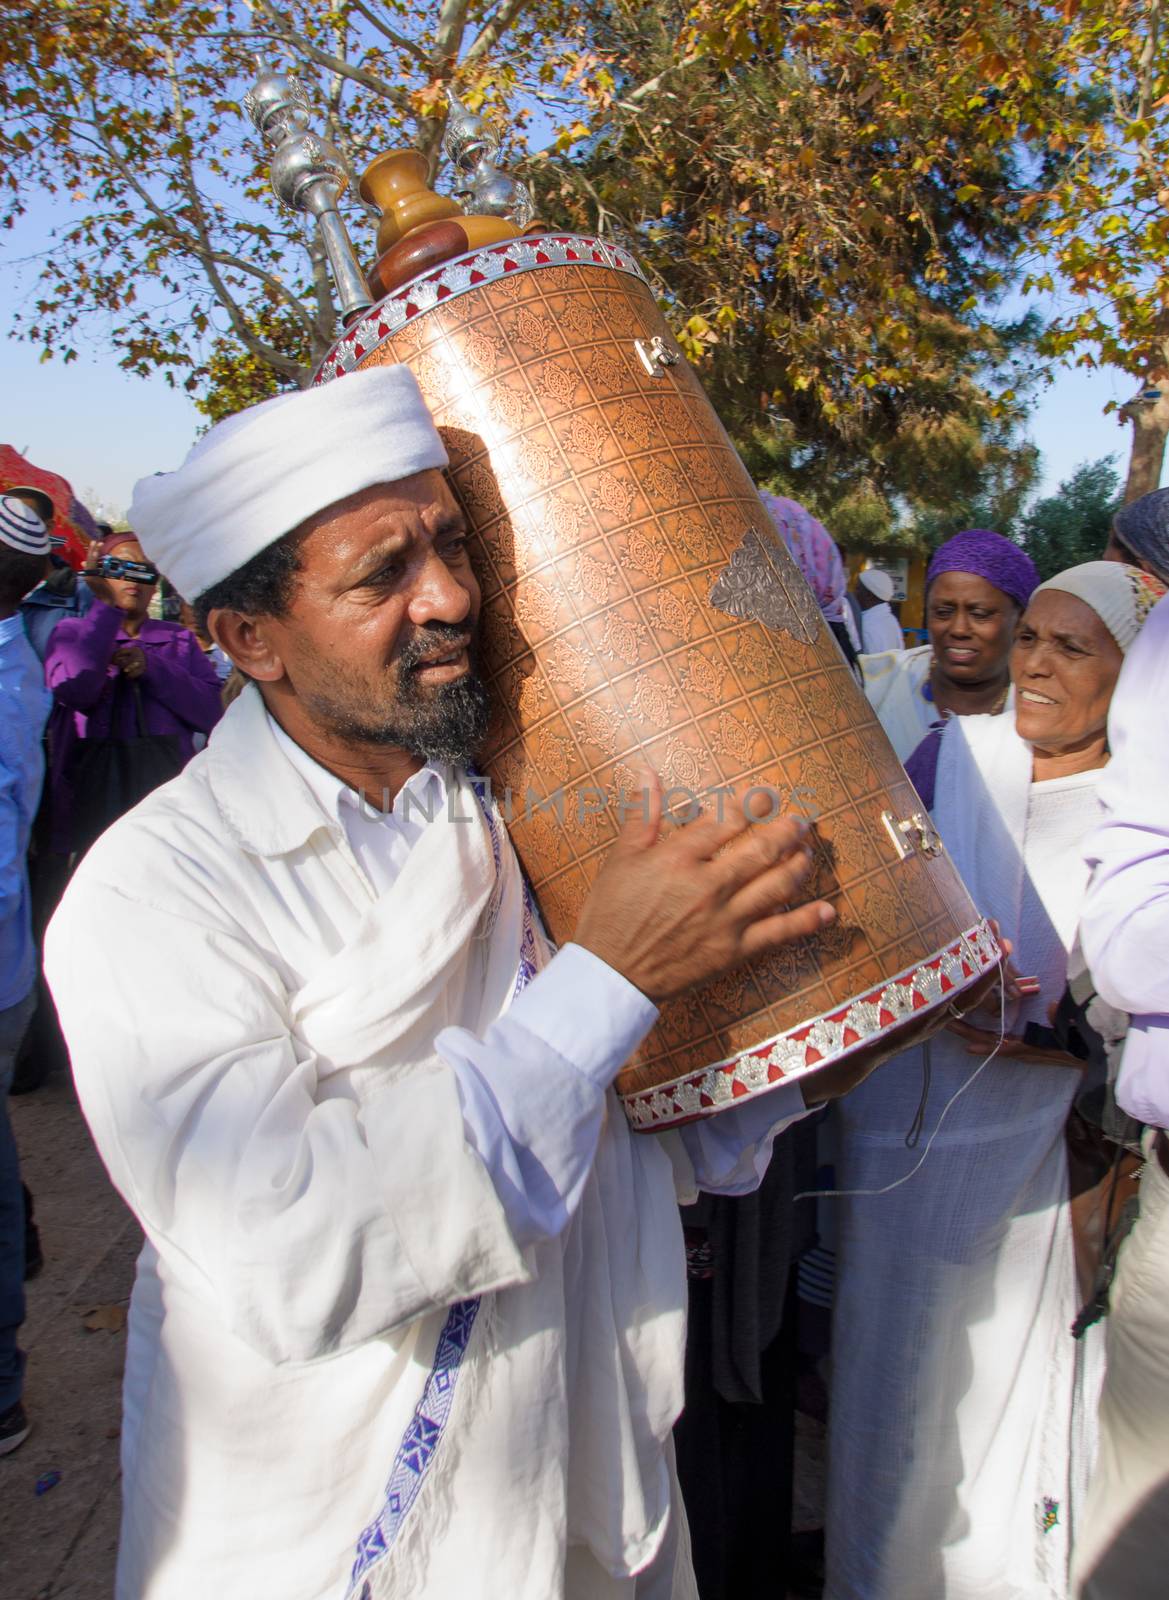 JERUSALEM - NOV 20, 2014: A Kes, religious leader of the Ethiopian Jews, carrying the holy torah book, at the end of the annual Sigd holiday prays, in Jerusalem, Israel